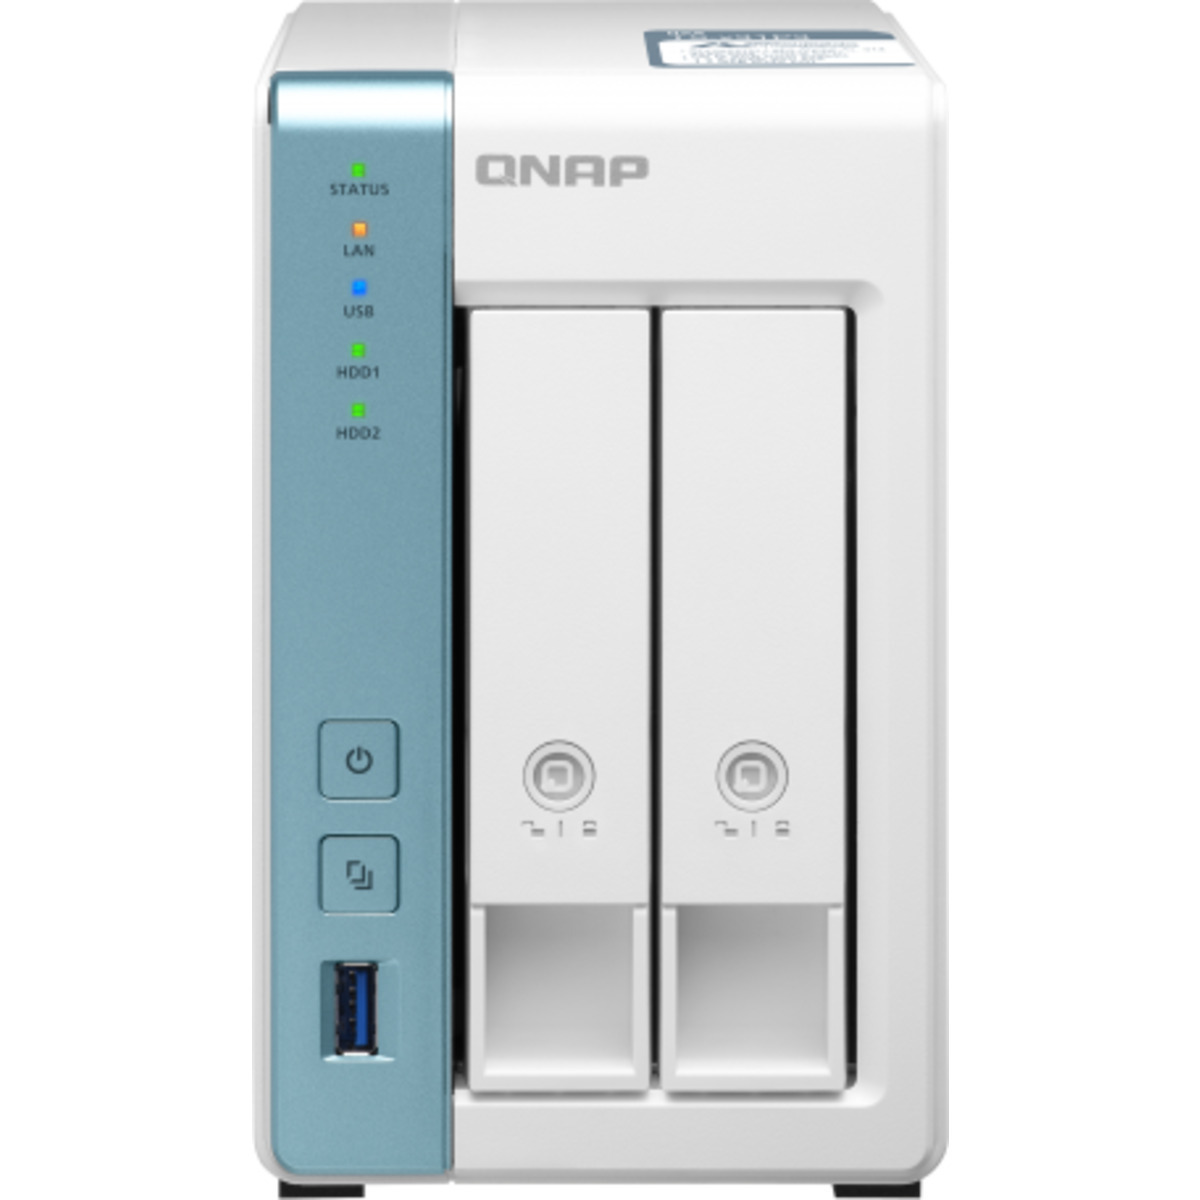 buy $2206 QNAP TS-231P3 16tb Desktop NAS - Network Attached Storage Device 2x8000gb Samsung 870 QVO MZ-77Q8T0 2.5 SATA 6Gb/s SSD CONSUMER Class Drives Installed - Burn-In Tested - FREE RAM UPGRADE - nas headquarters buy network attached storage server device das new raid-5 free shipping usa christmas new year holiday sale TS-231P3